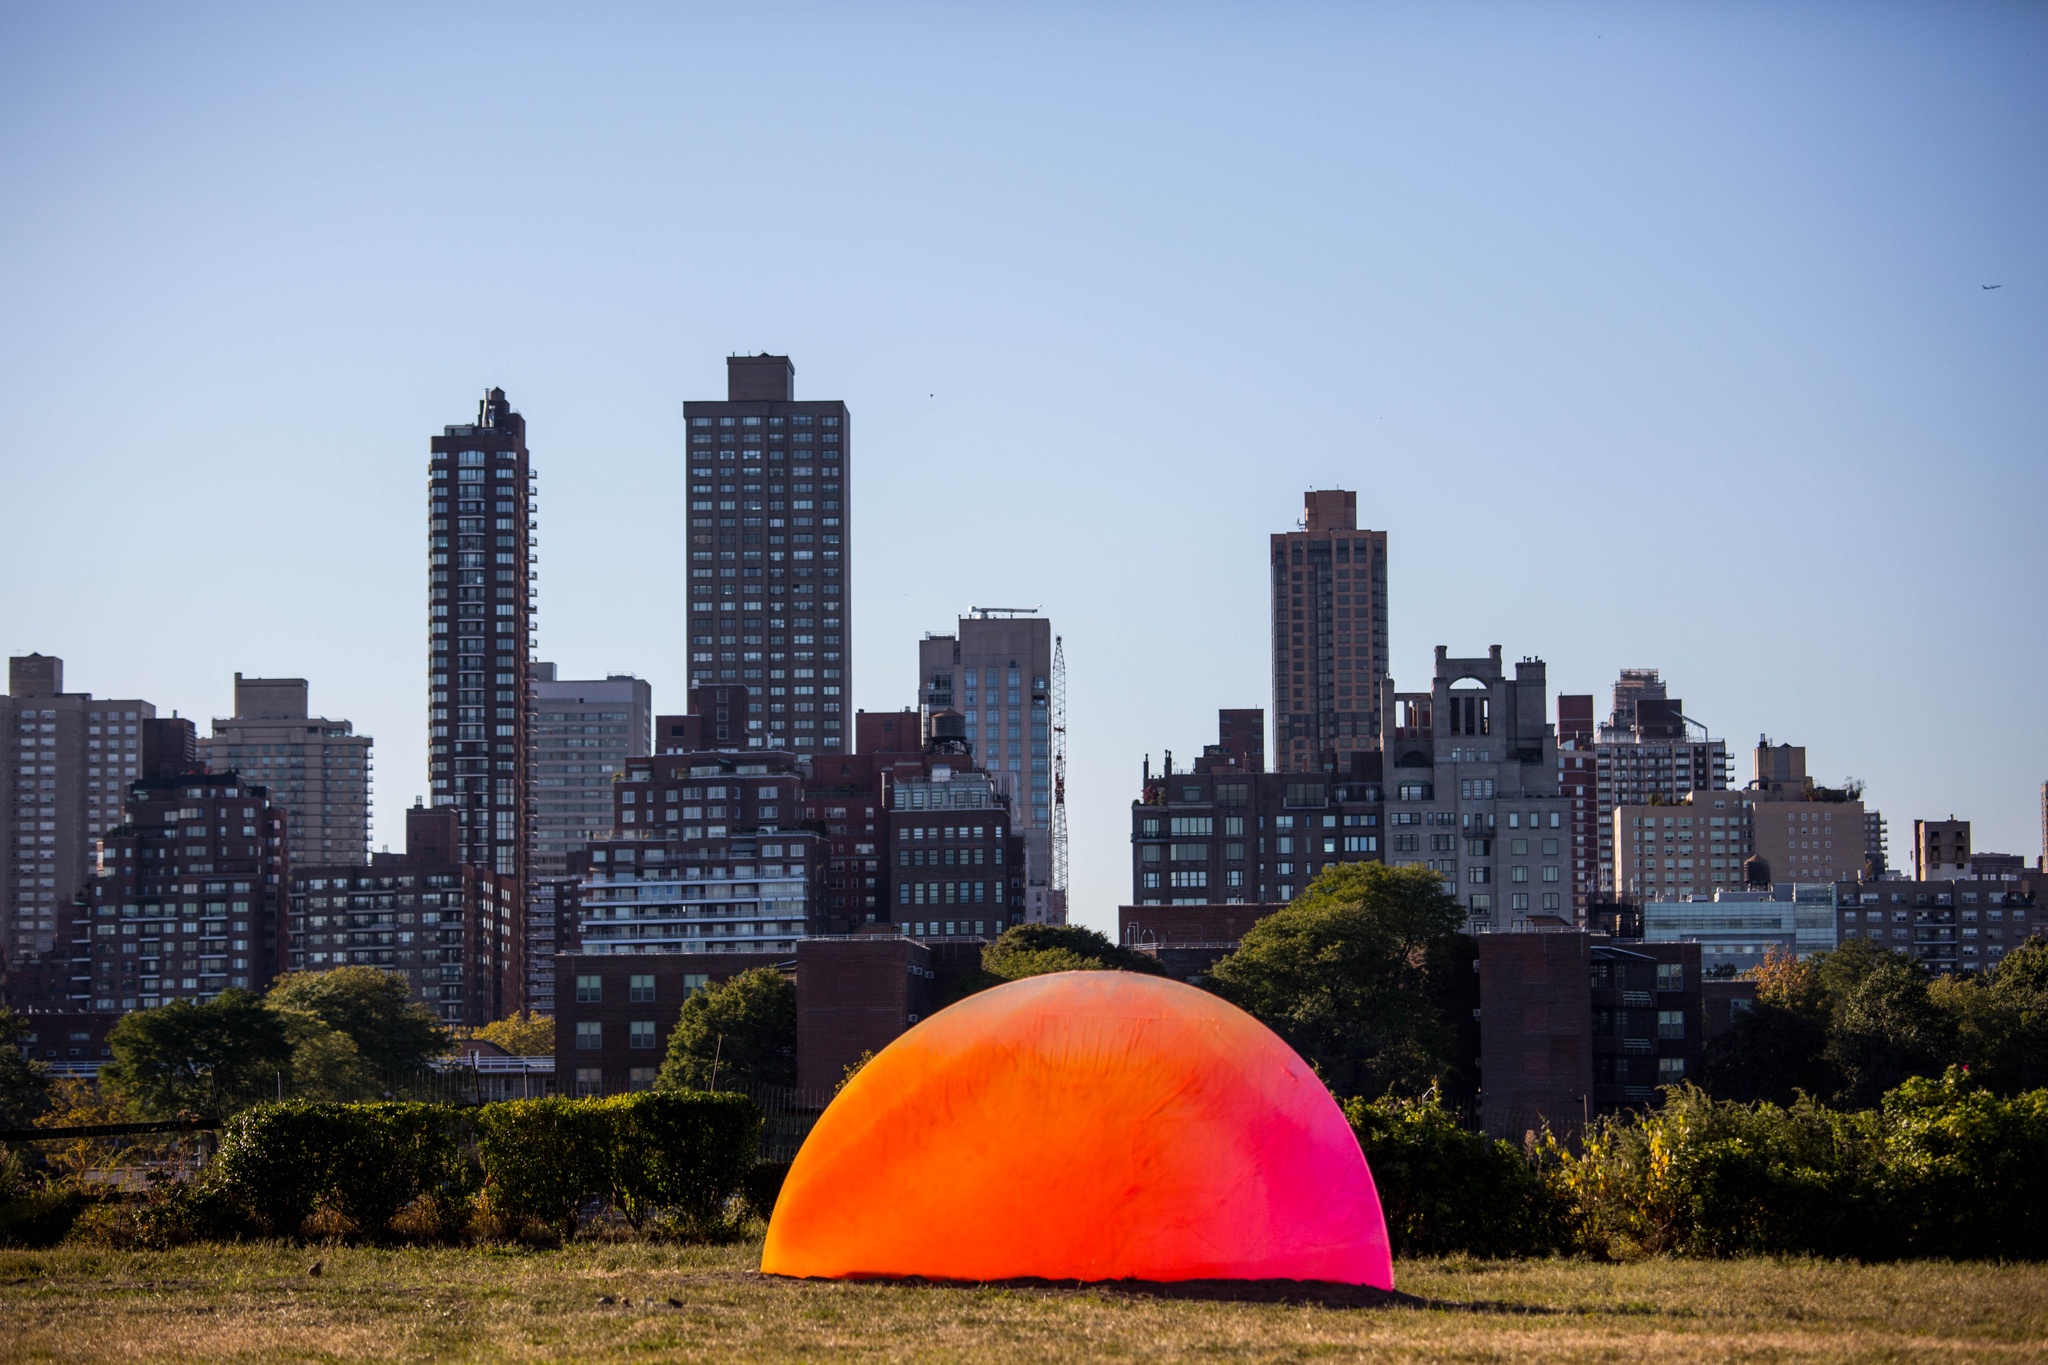 A large half-circle panel sits in a field with a city skyline in the background. The half-circle is colored with a gradient of fluorescent oranges that fades into pinks and purple, evoking a sun rising out of the earth.